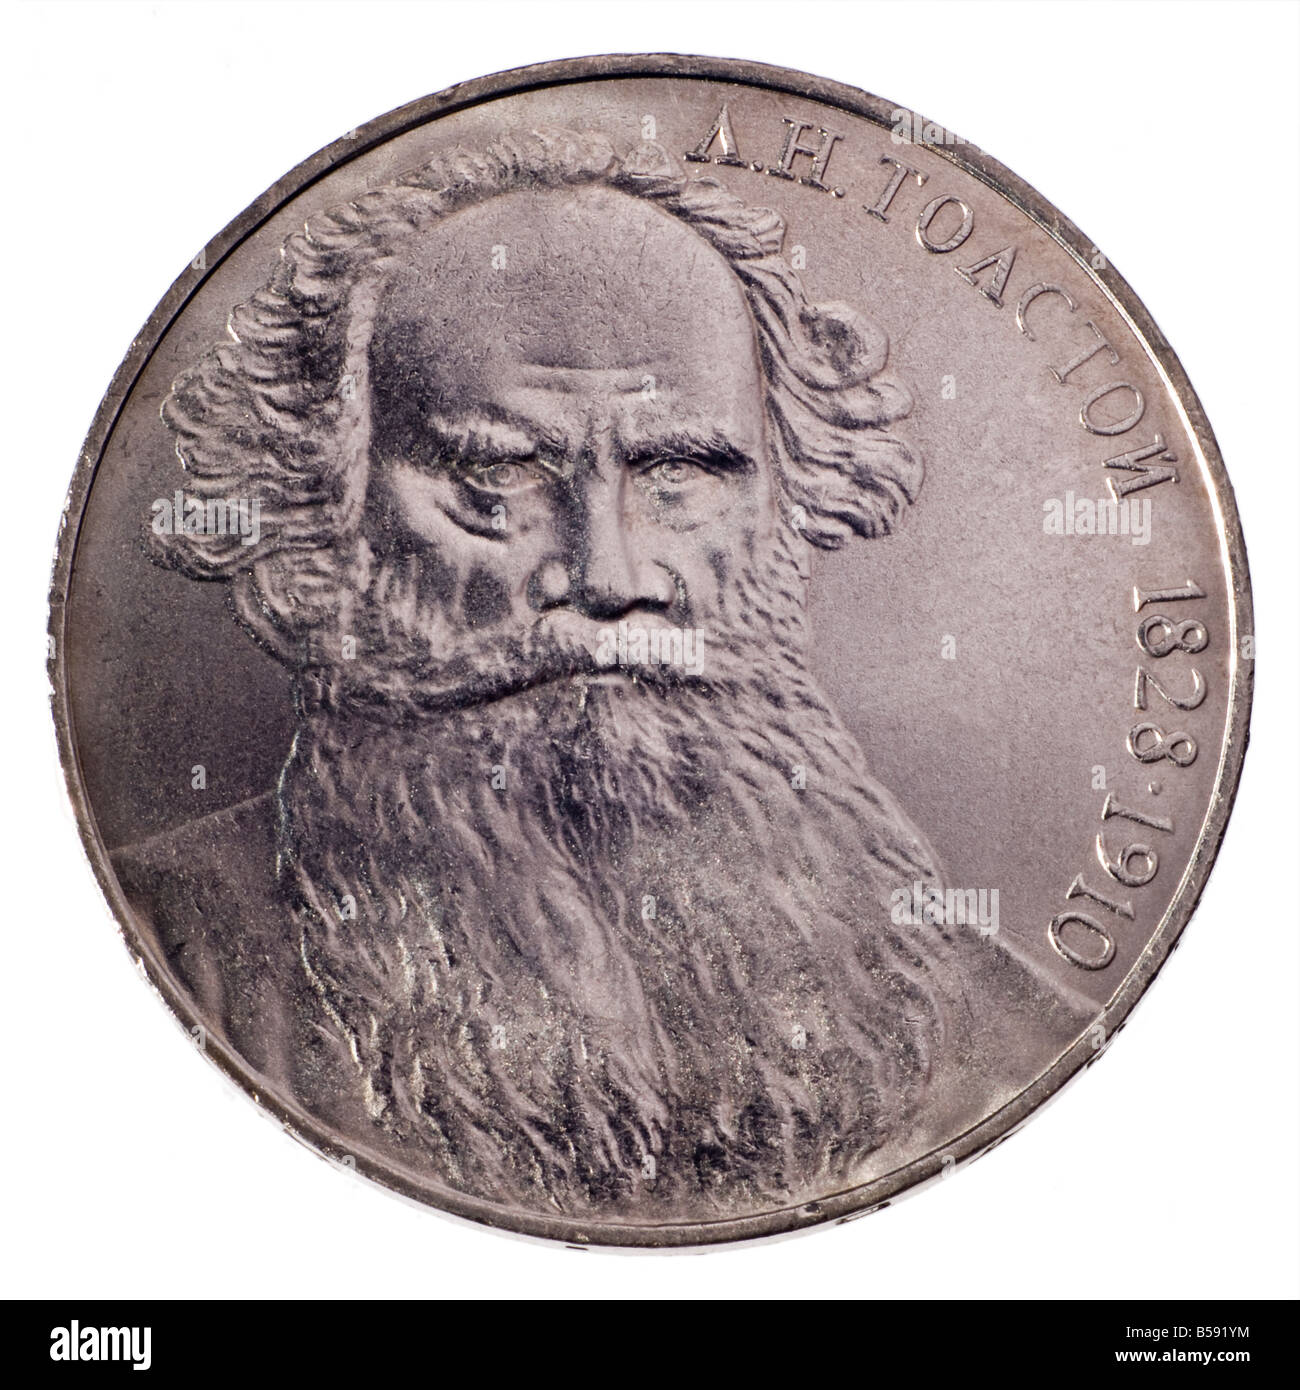 Russian 1 Rouble Coin, 1988. Leon Tolstoy (Writer' 1828-1910) Stock Photo